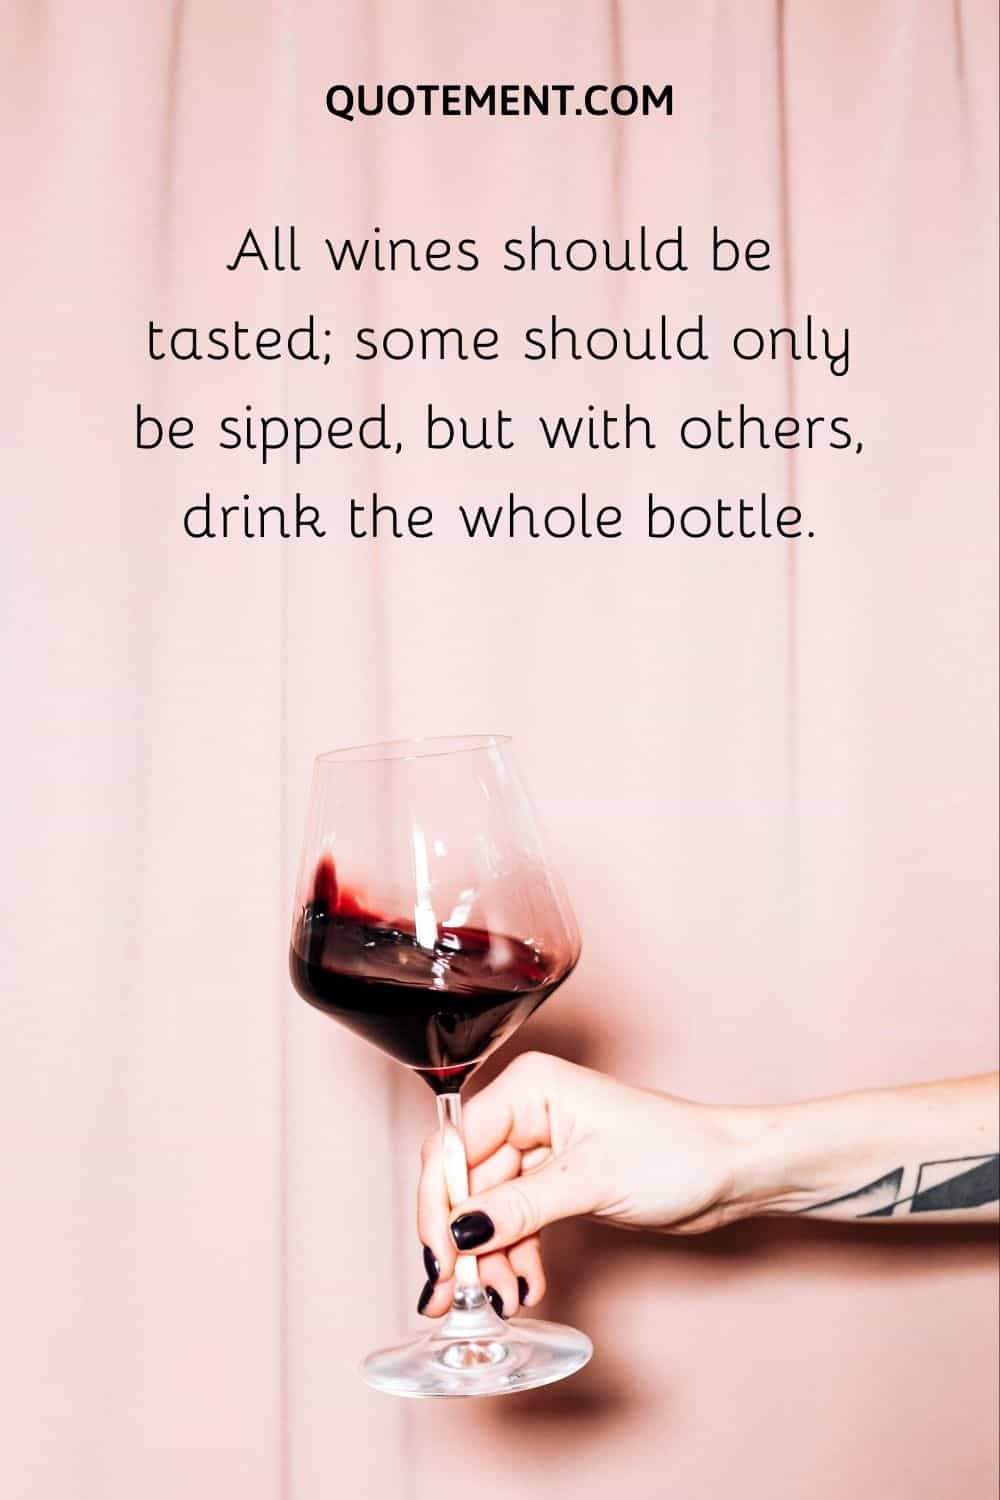 All wines should be tasted